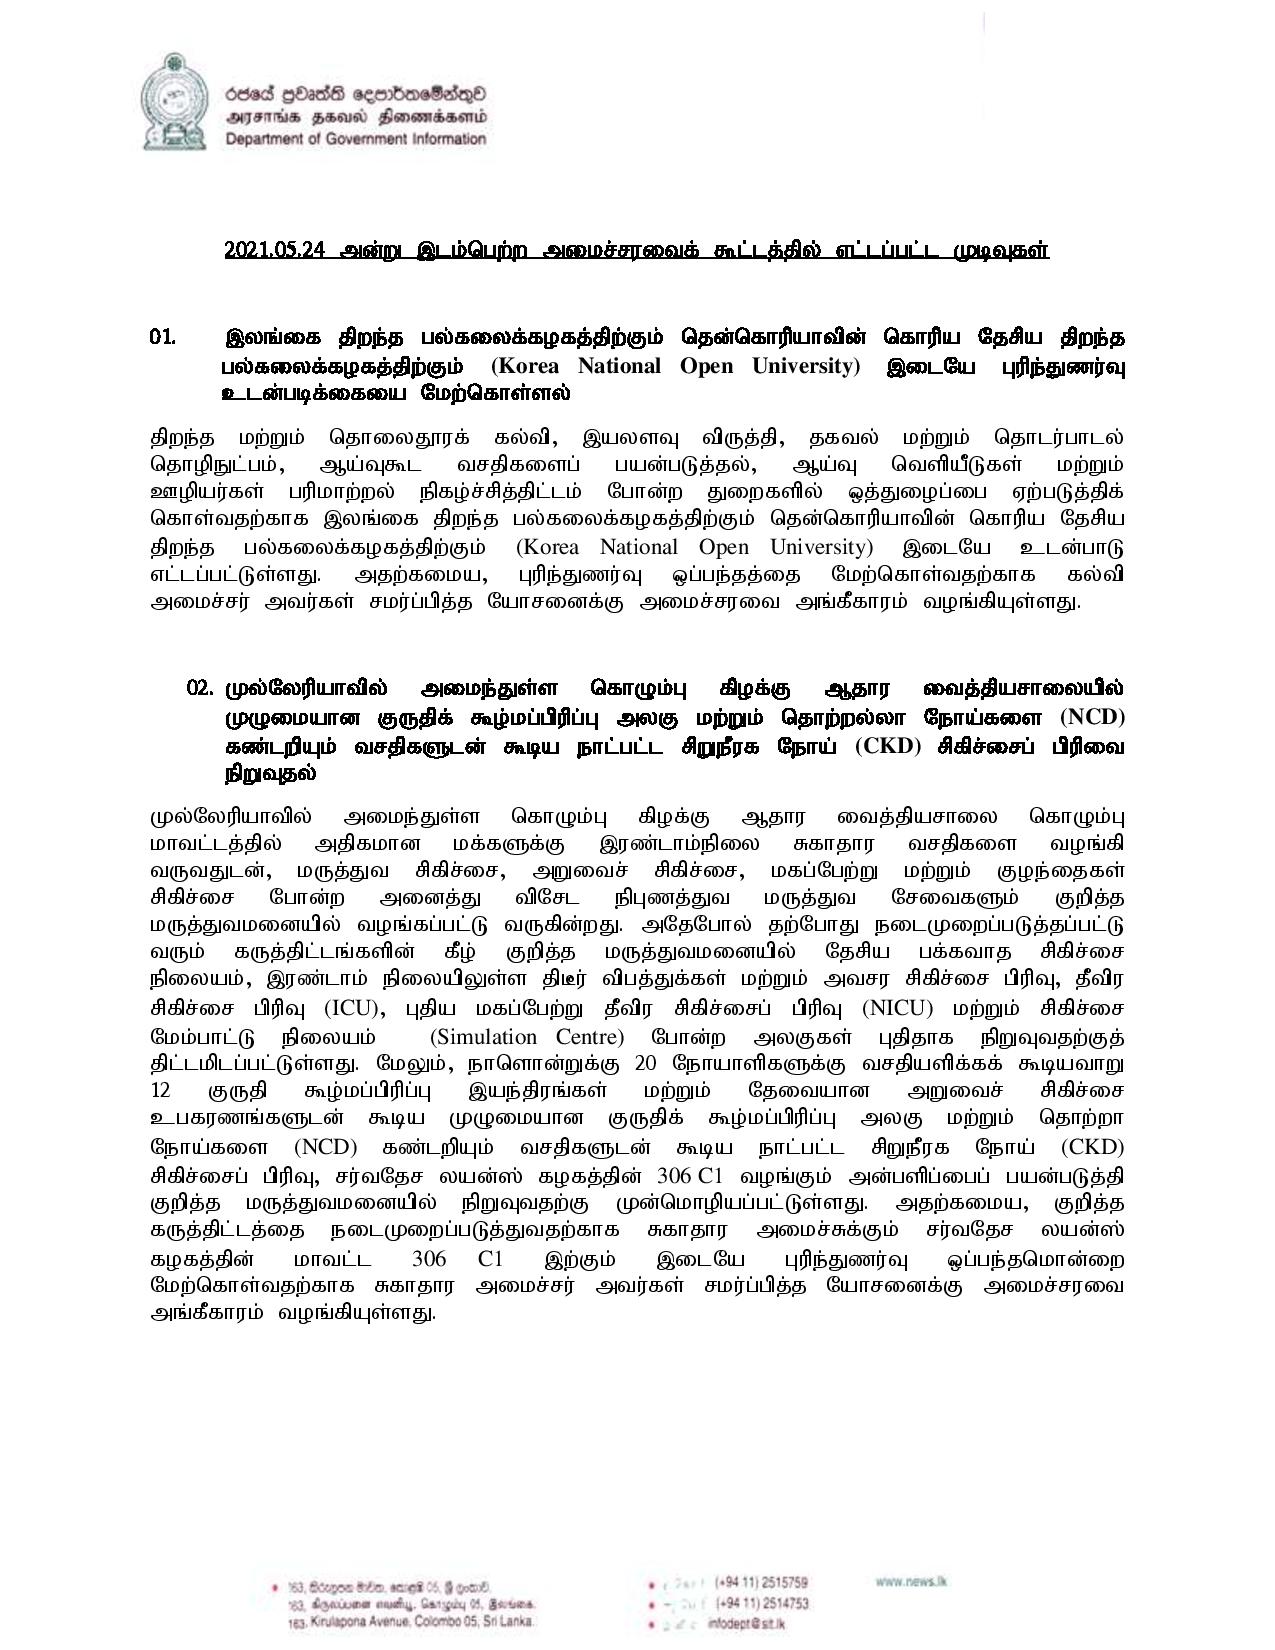 Cabinet Decision on 24.05.2021 Tamil 1 page 001